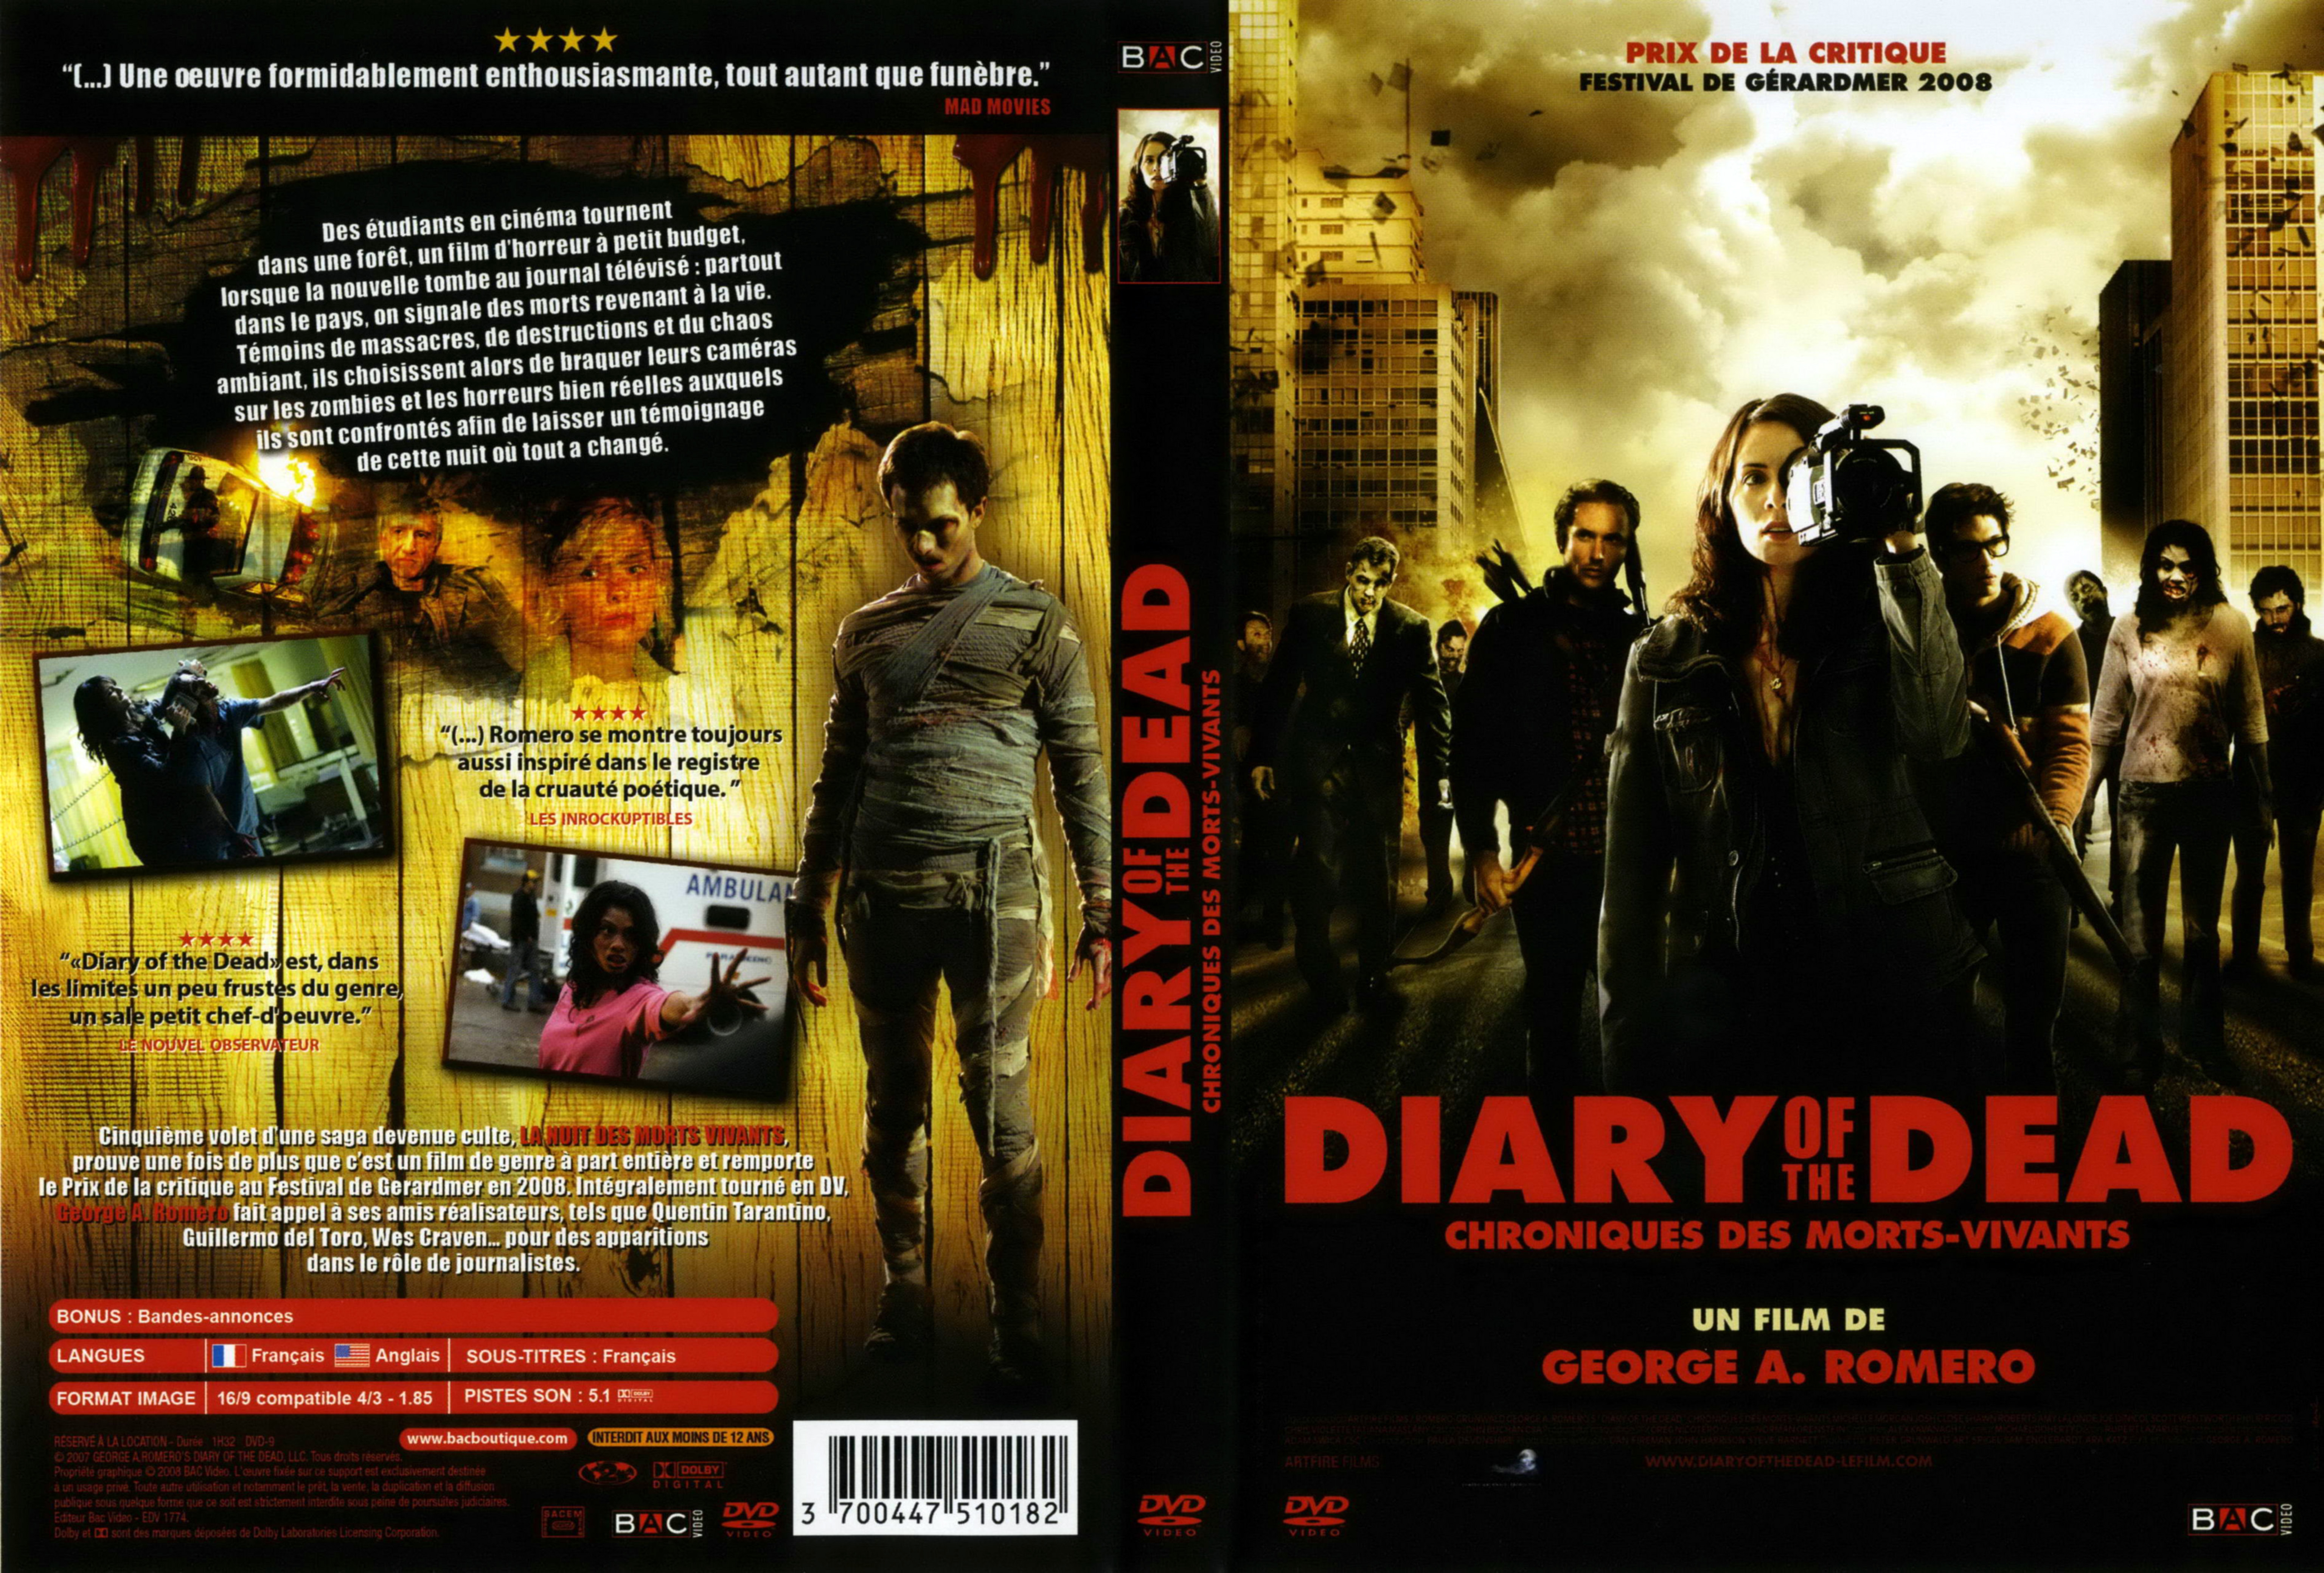 Jaquette DVD Diary of the dead